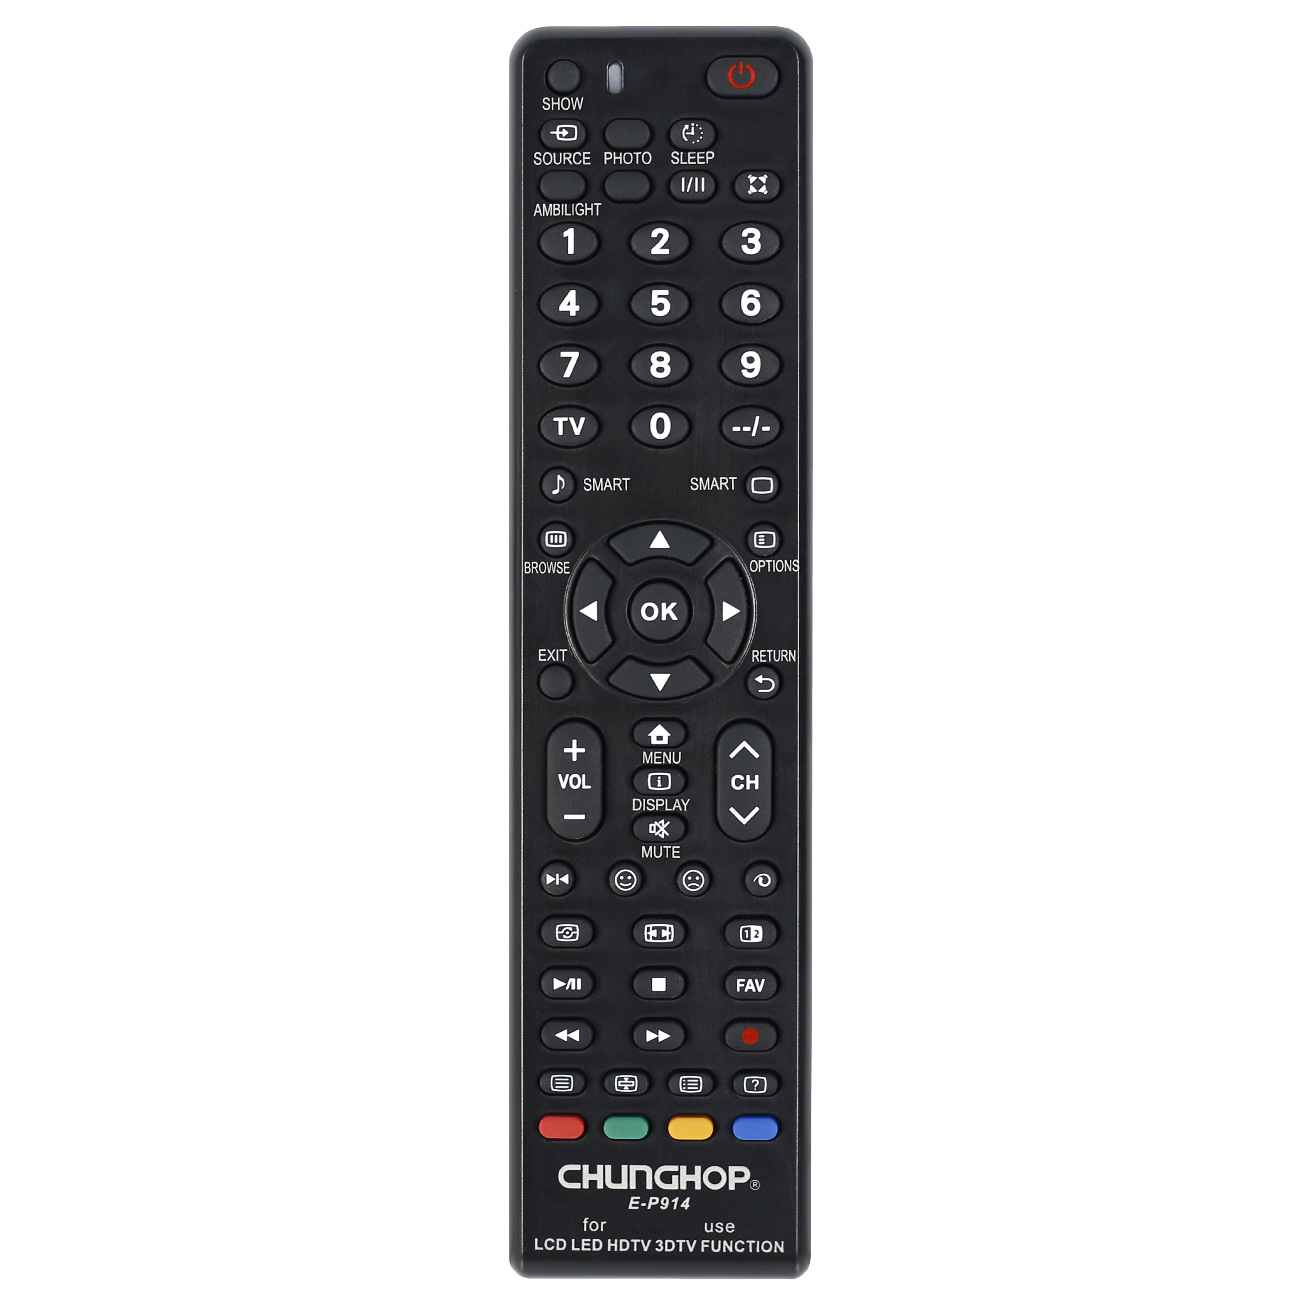 

Chunghop Universal TV Remote Control E-P914 for Philips LCD LED HDTV 3DTV Super compatibility